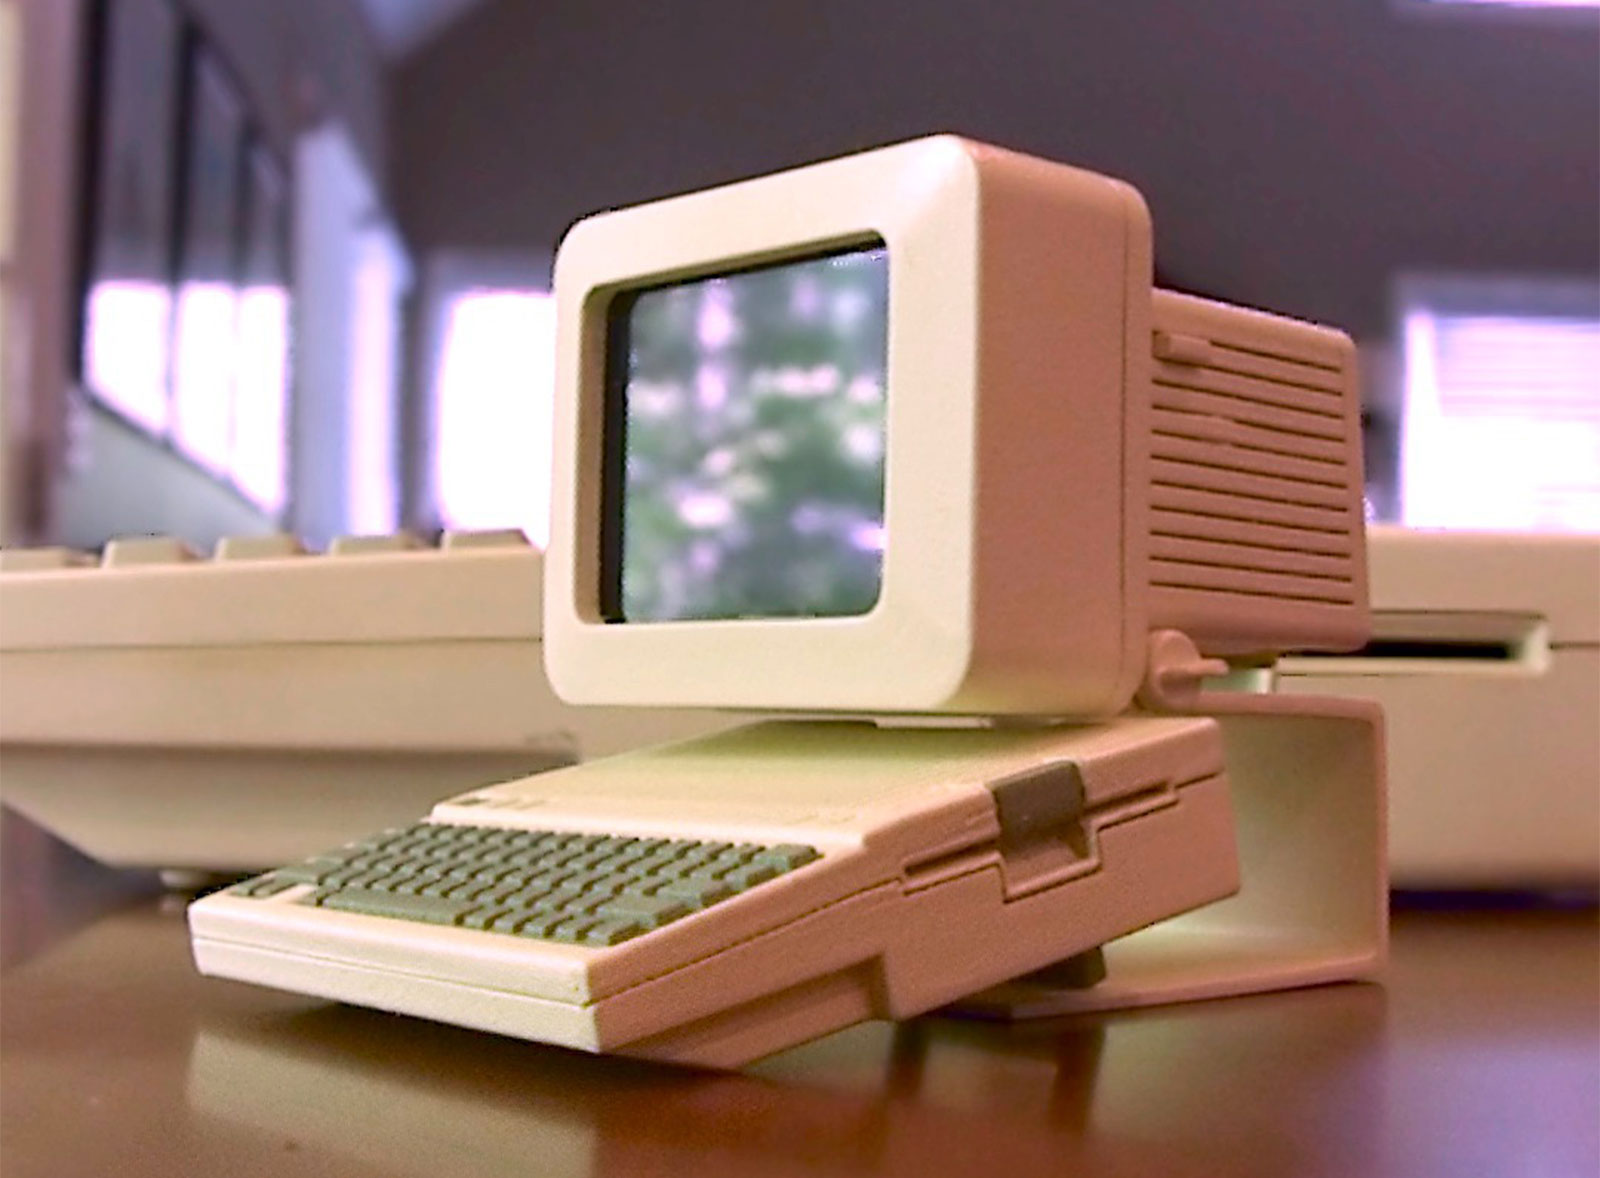 Charles Mangin likes them Apples, especially when he can recreate a 3D printed miniature version of his favorite computers.